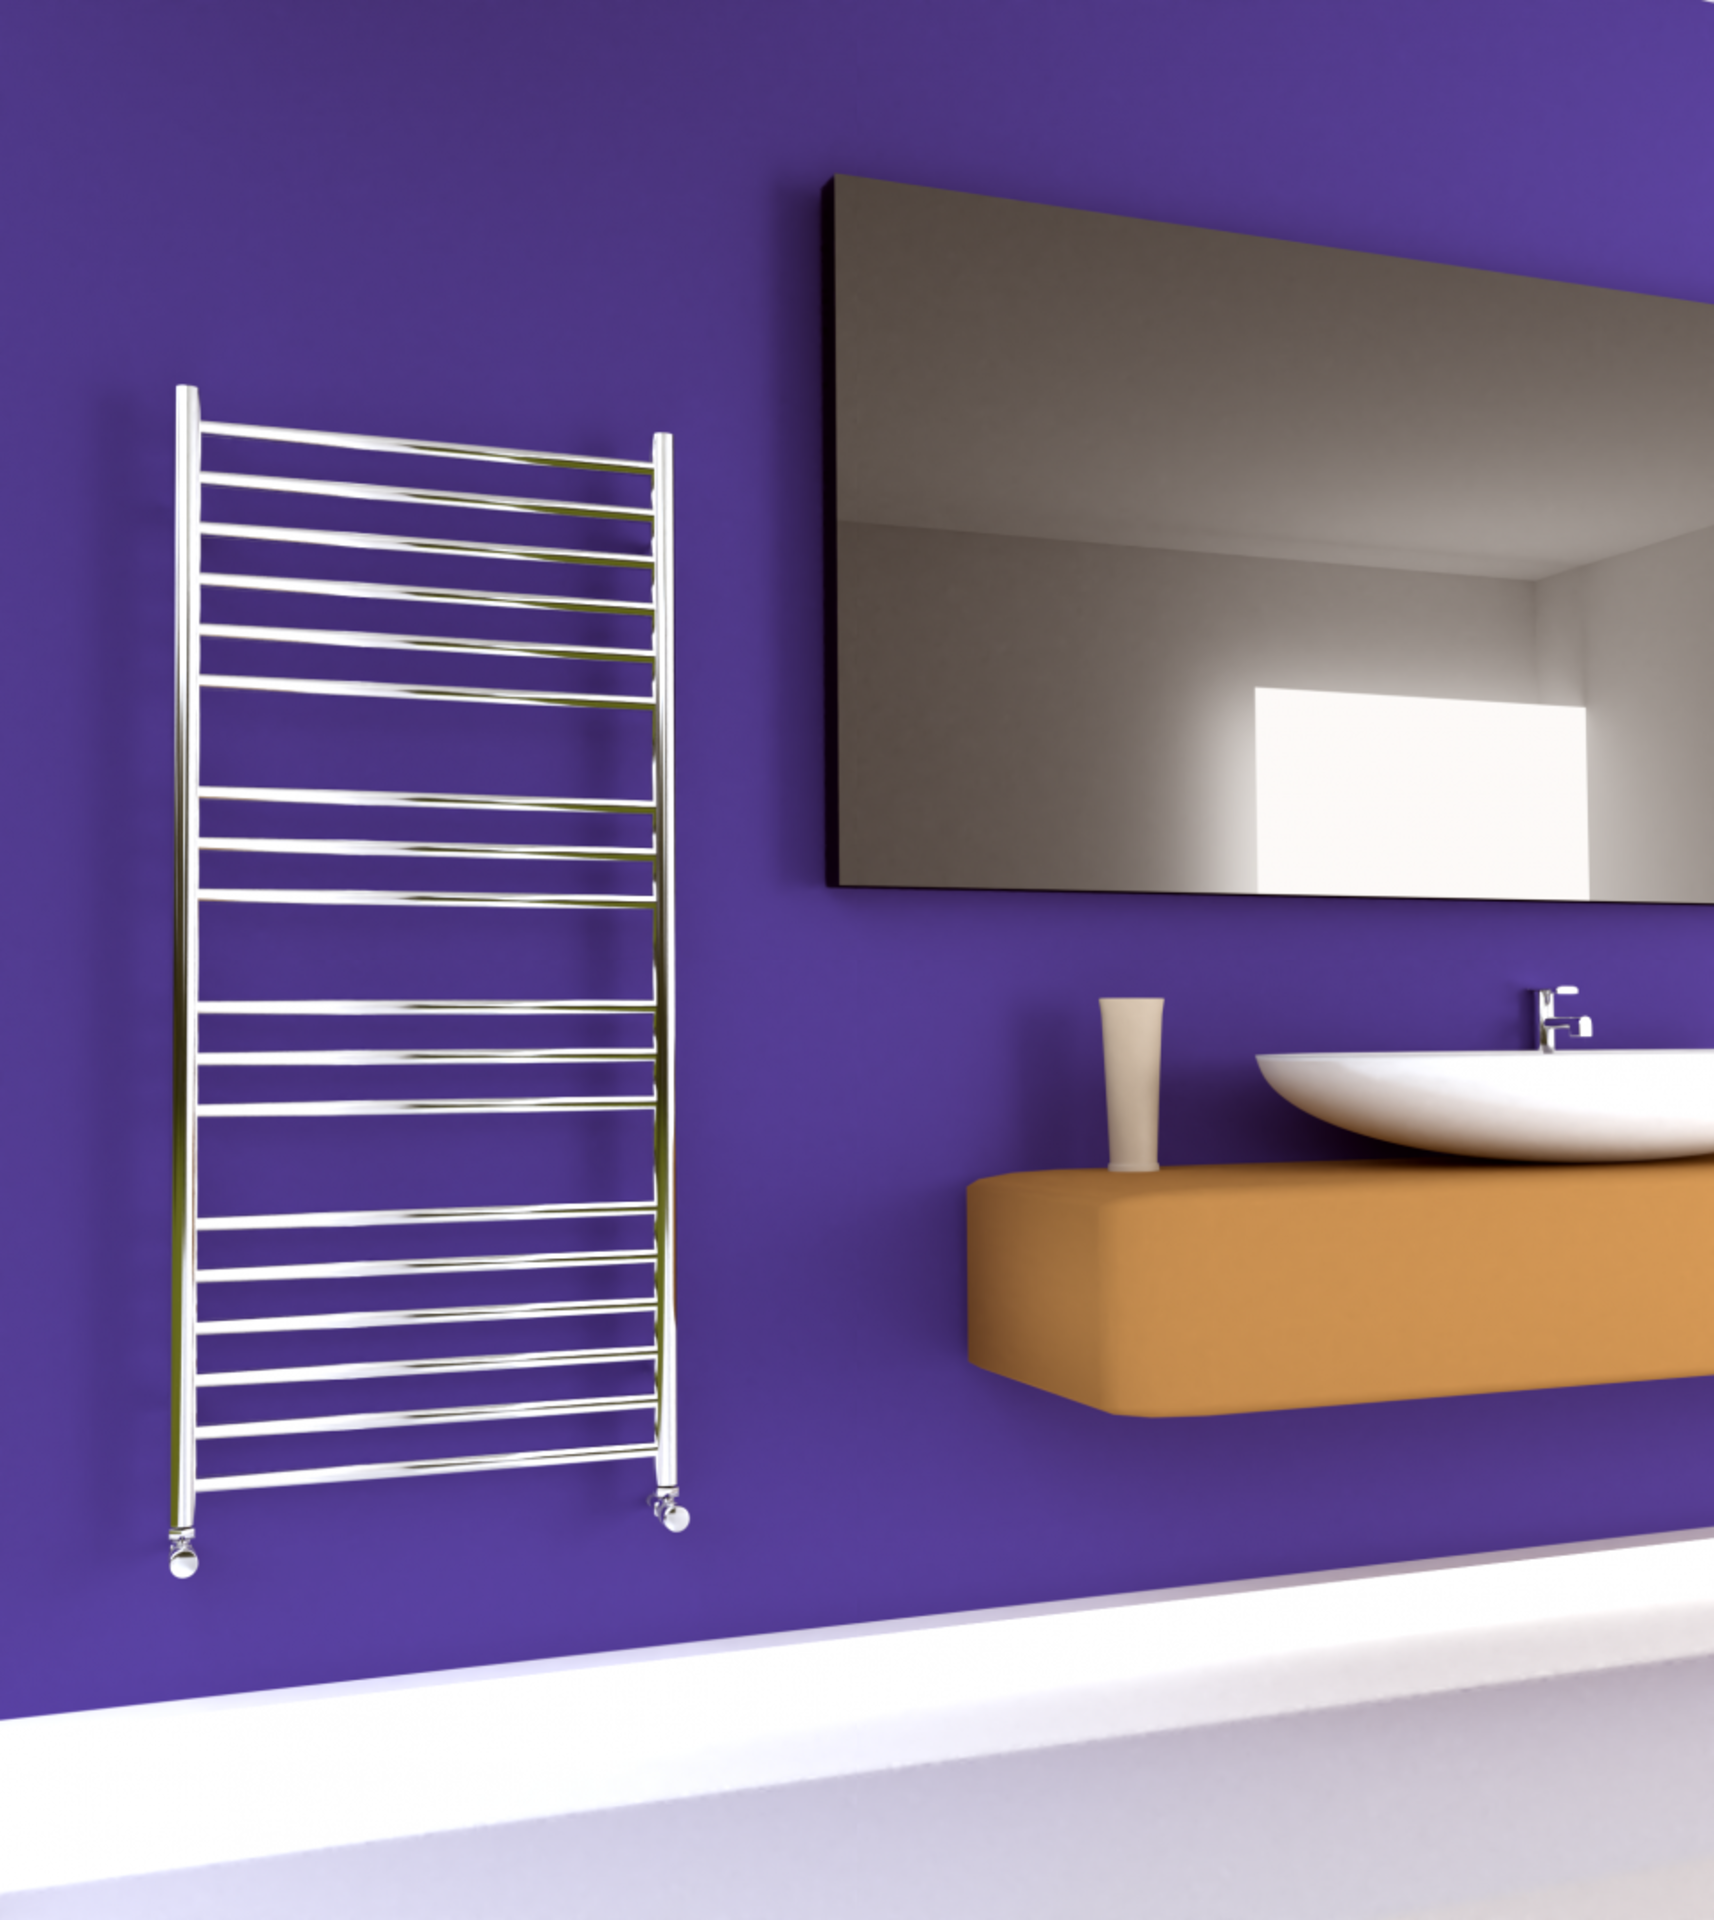 SS101 Maxi Flat 600 Radiator by SBH in Anthracite Finish. H1300 x W600mm. RRP £554.37